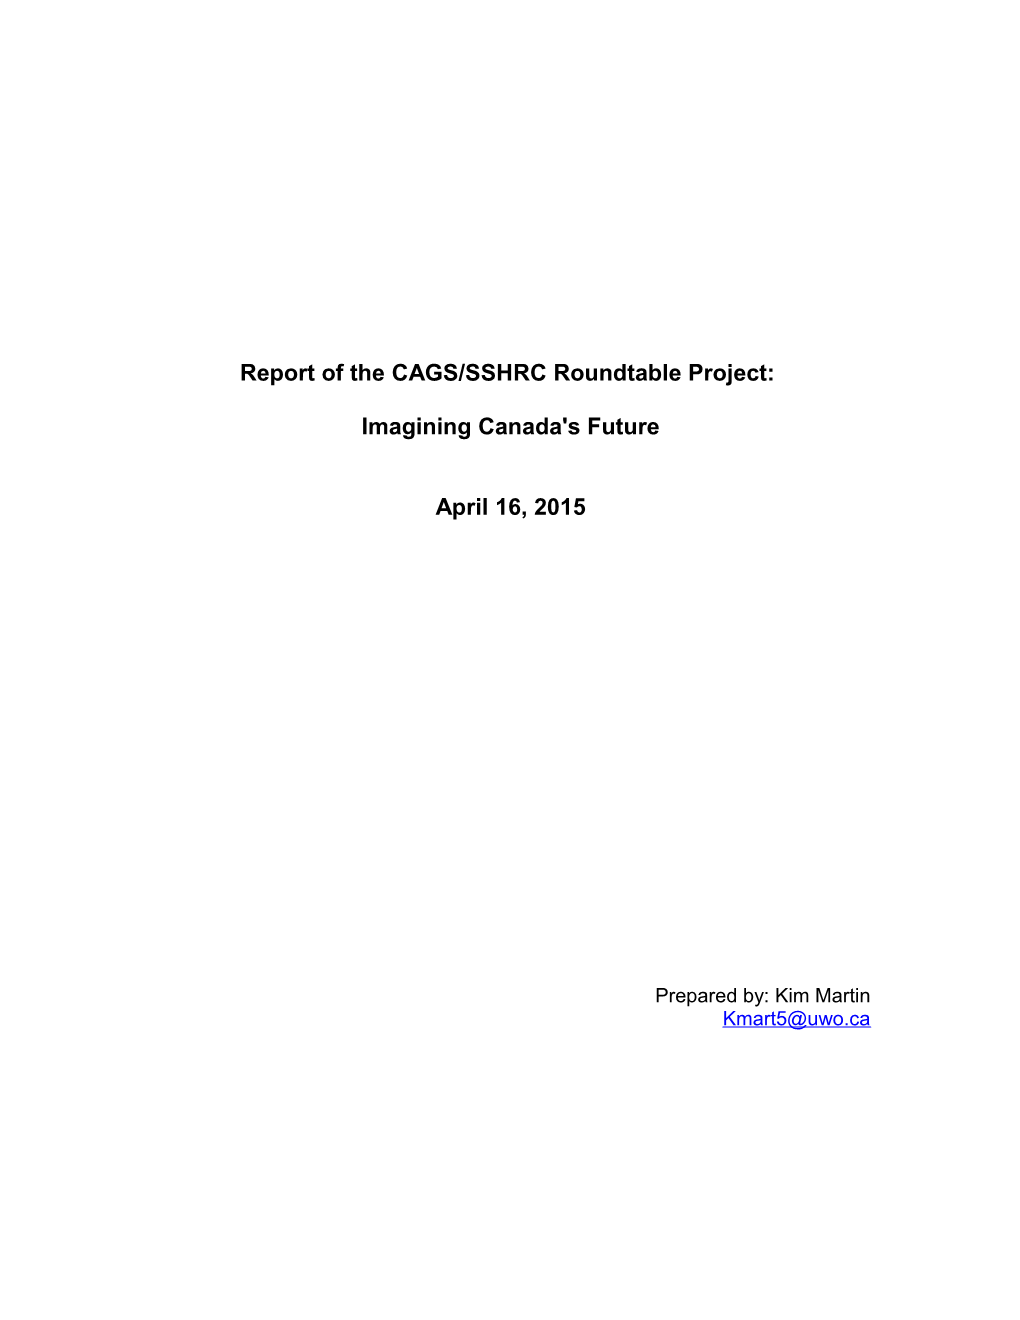 Report of the CAGS/SSHRC Roundtable Project